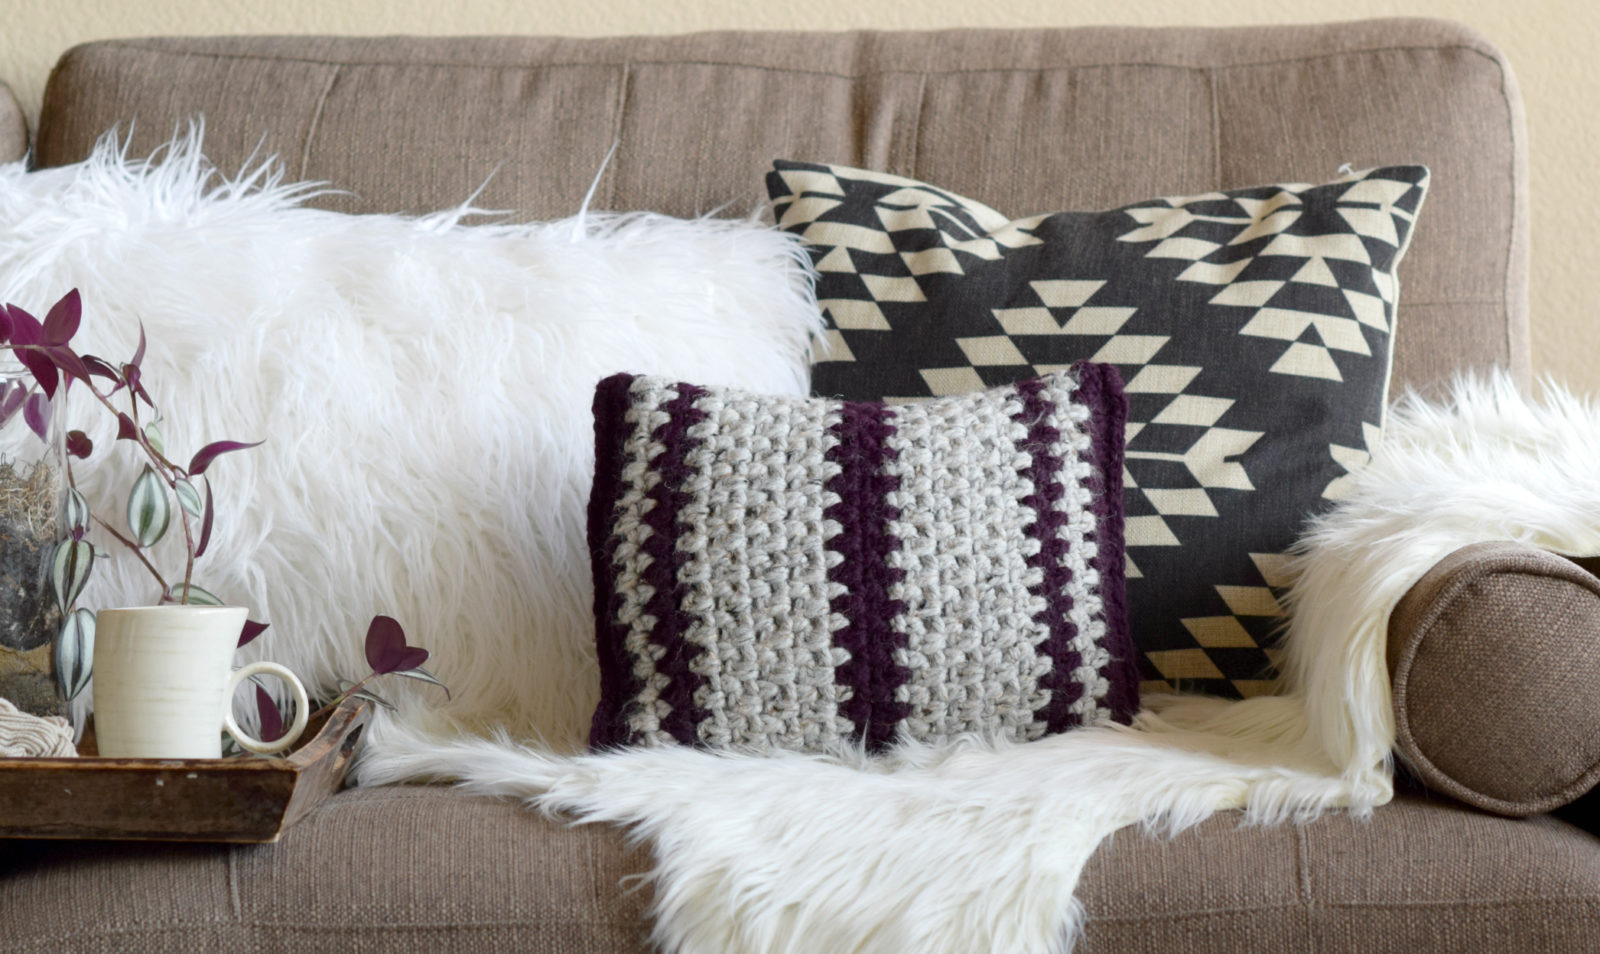 Taos Crochet Throw Pillow & Wool Ease Yarn – Mama In A Stitch